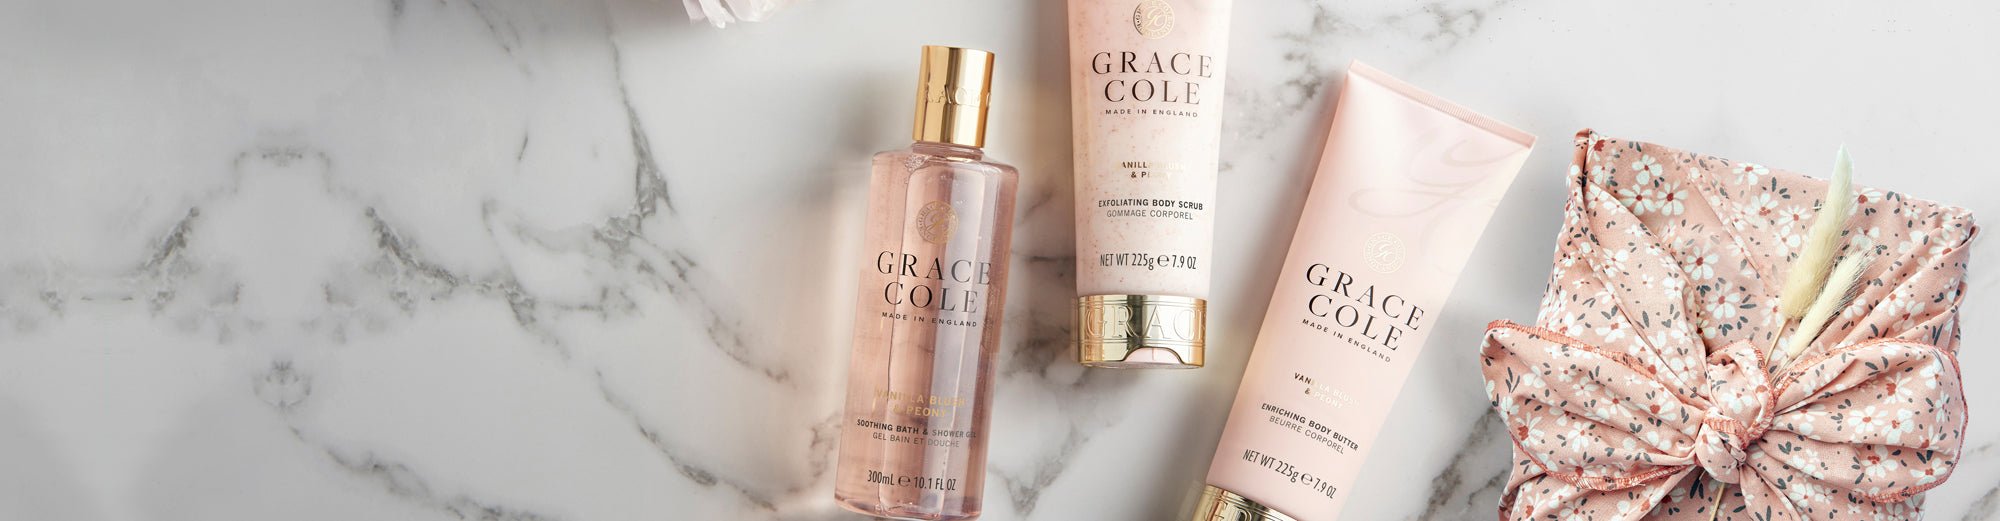 Grace Cole Gift Collections - Grace Cole Limited